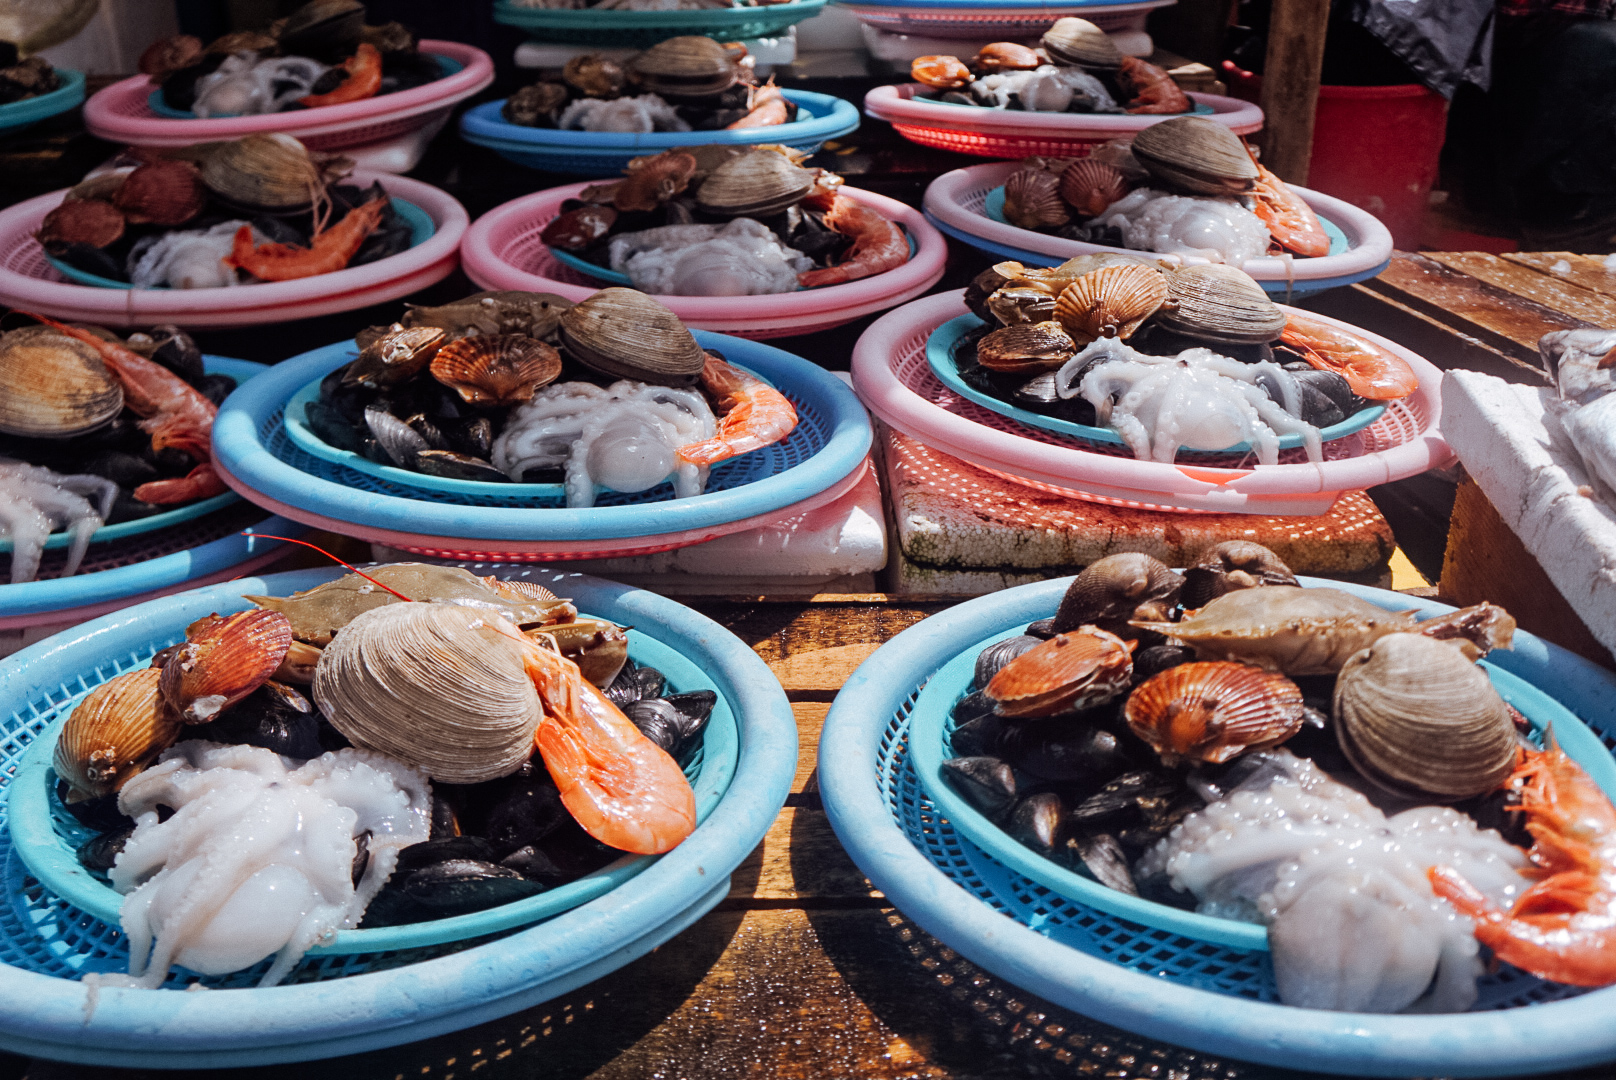 plates of raw seafood at the seafood market in busan